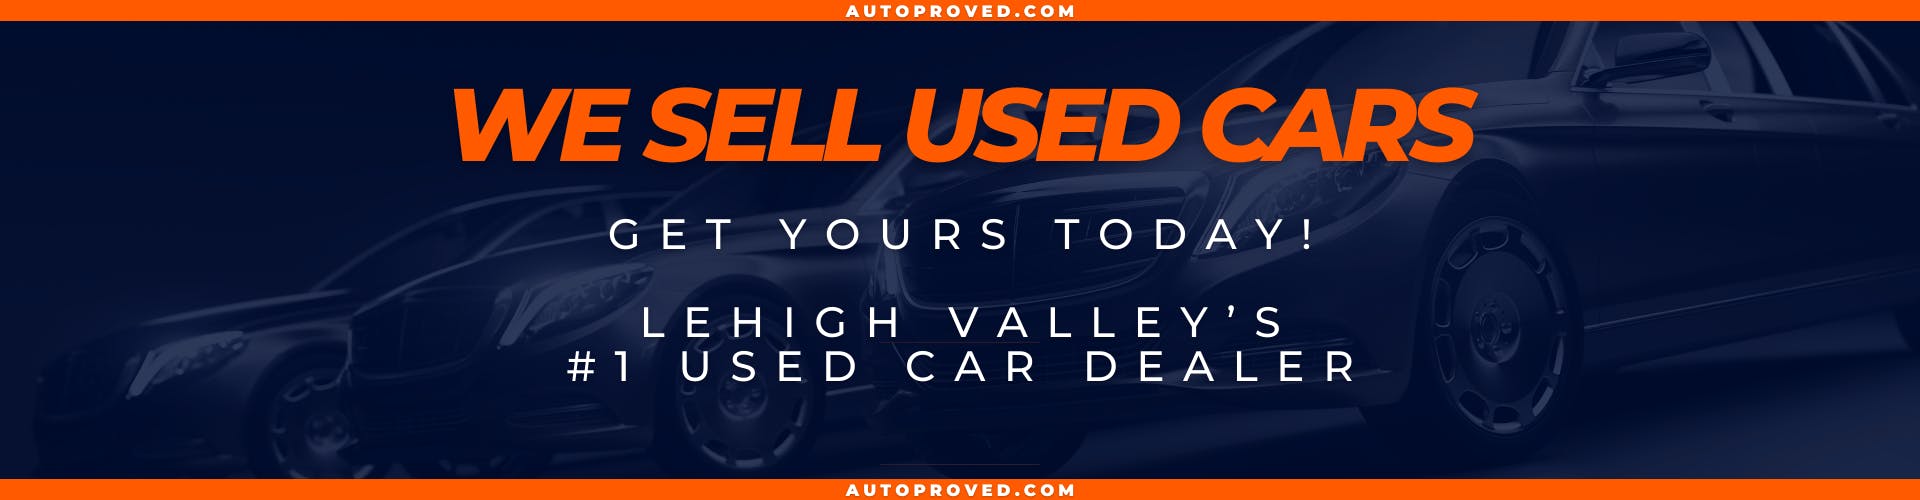 We sell Used Cars